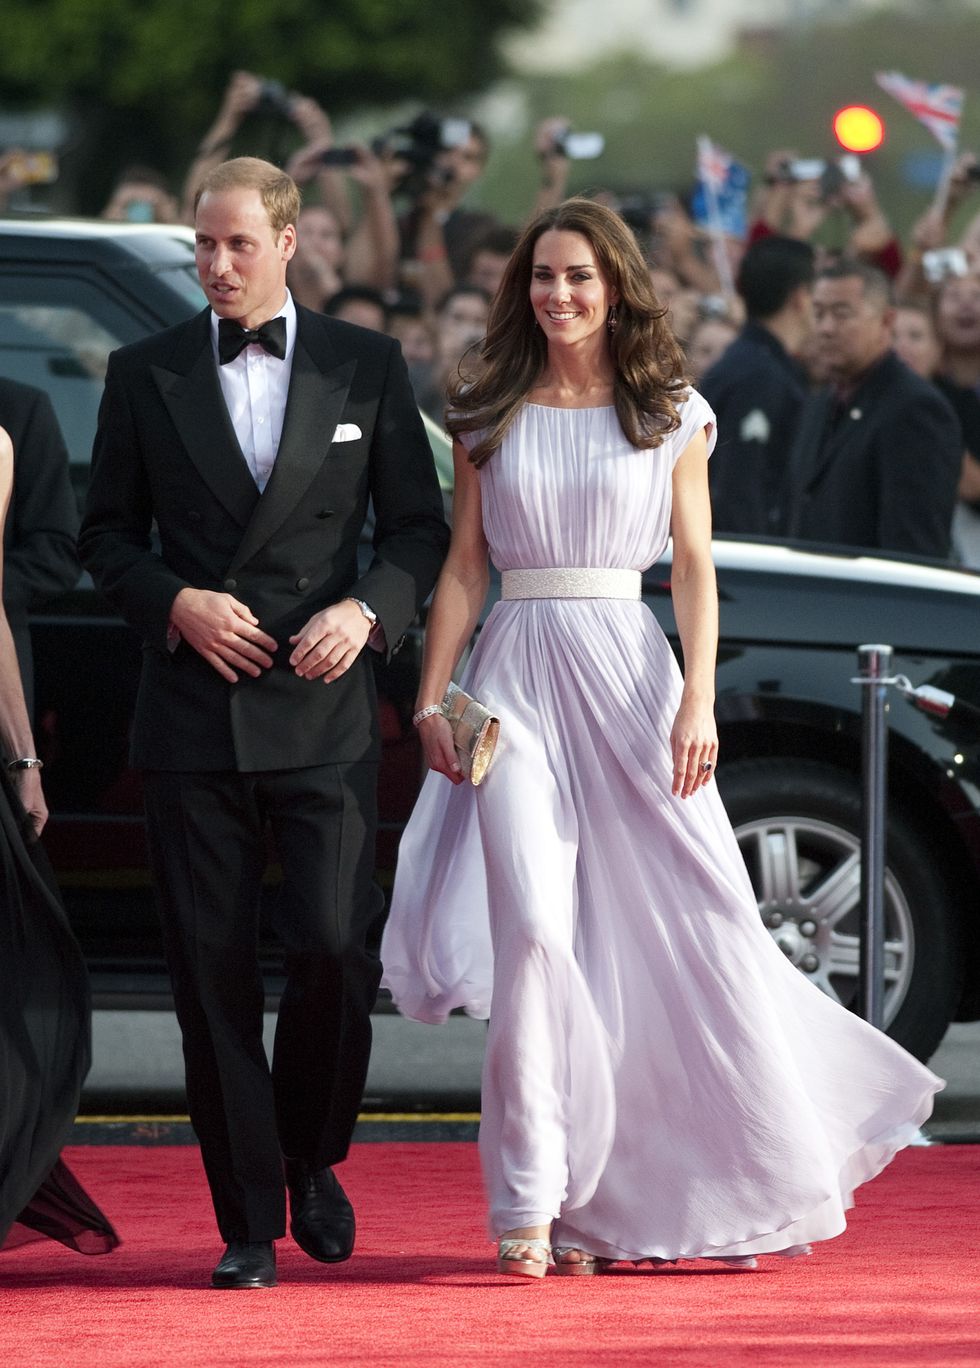 Prince William and Duchess Catherine at the BAFTA Brits to Watch event in Los Angeles July 9, 2011